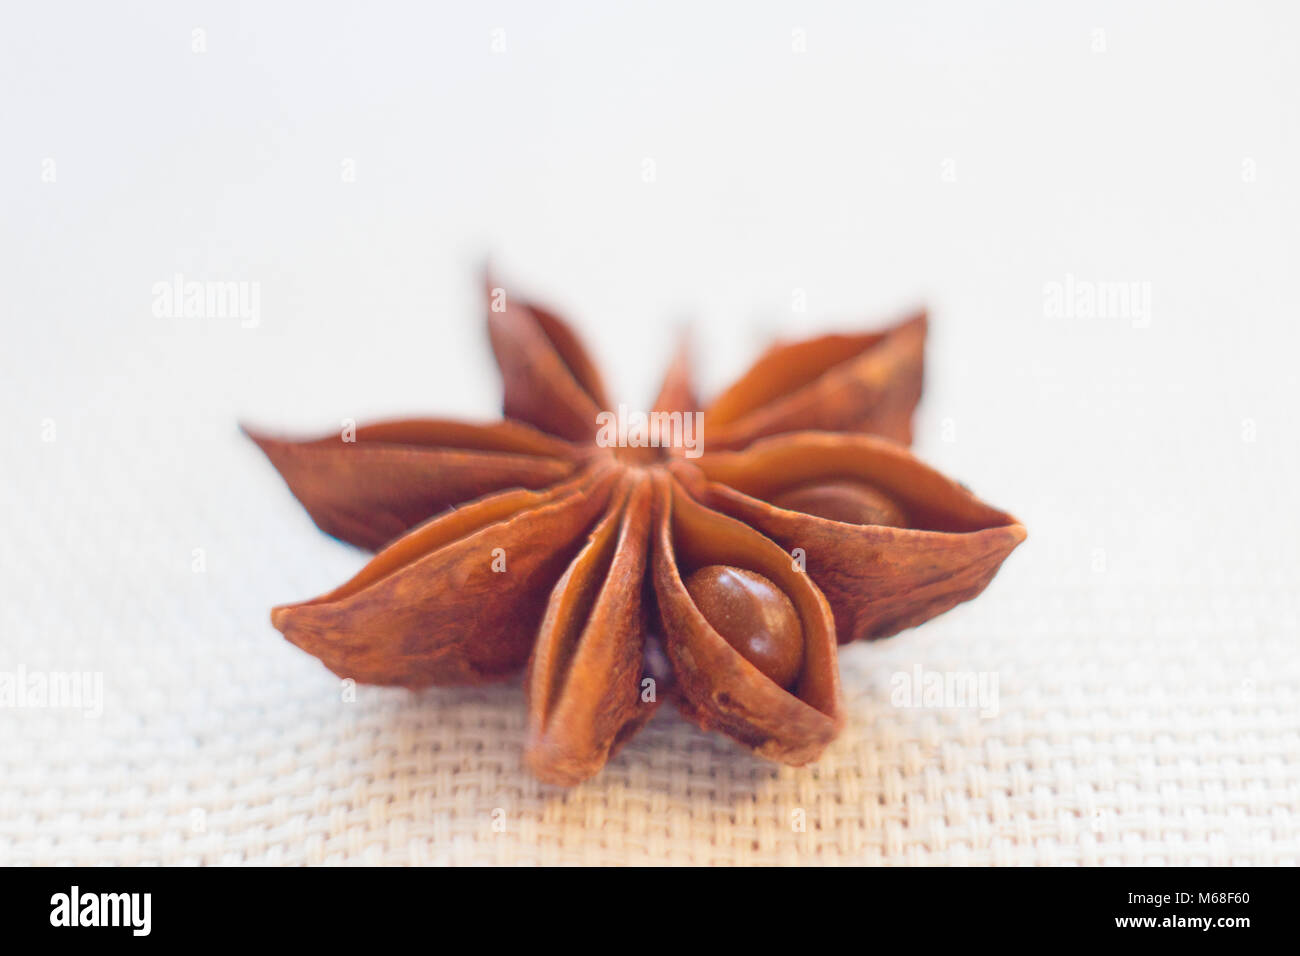 The dried anise flower lies on the table. Stock Photo